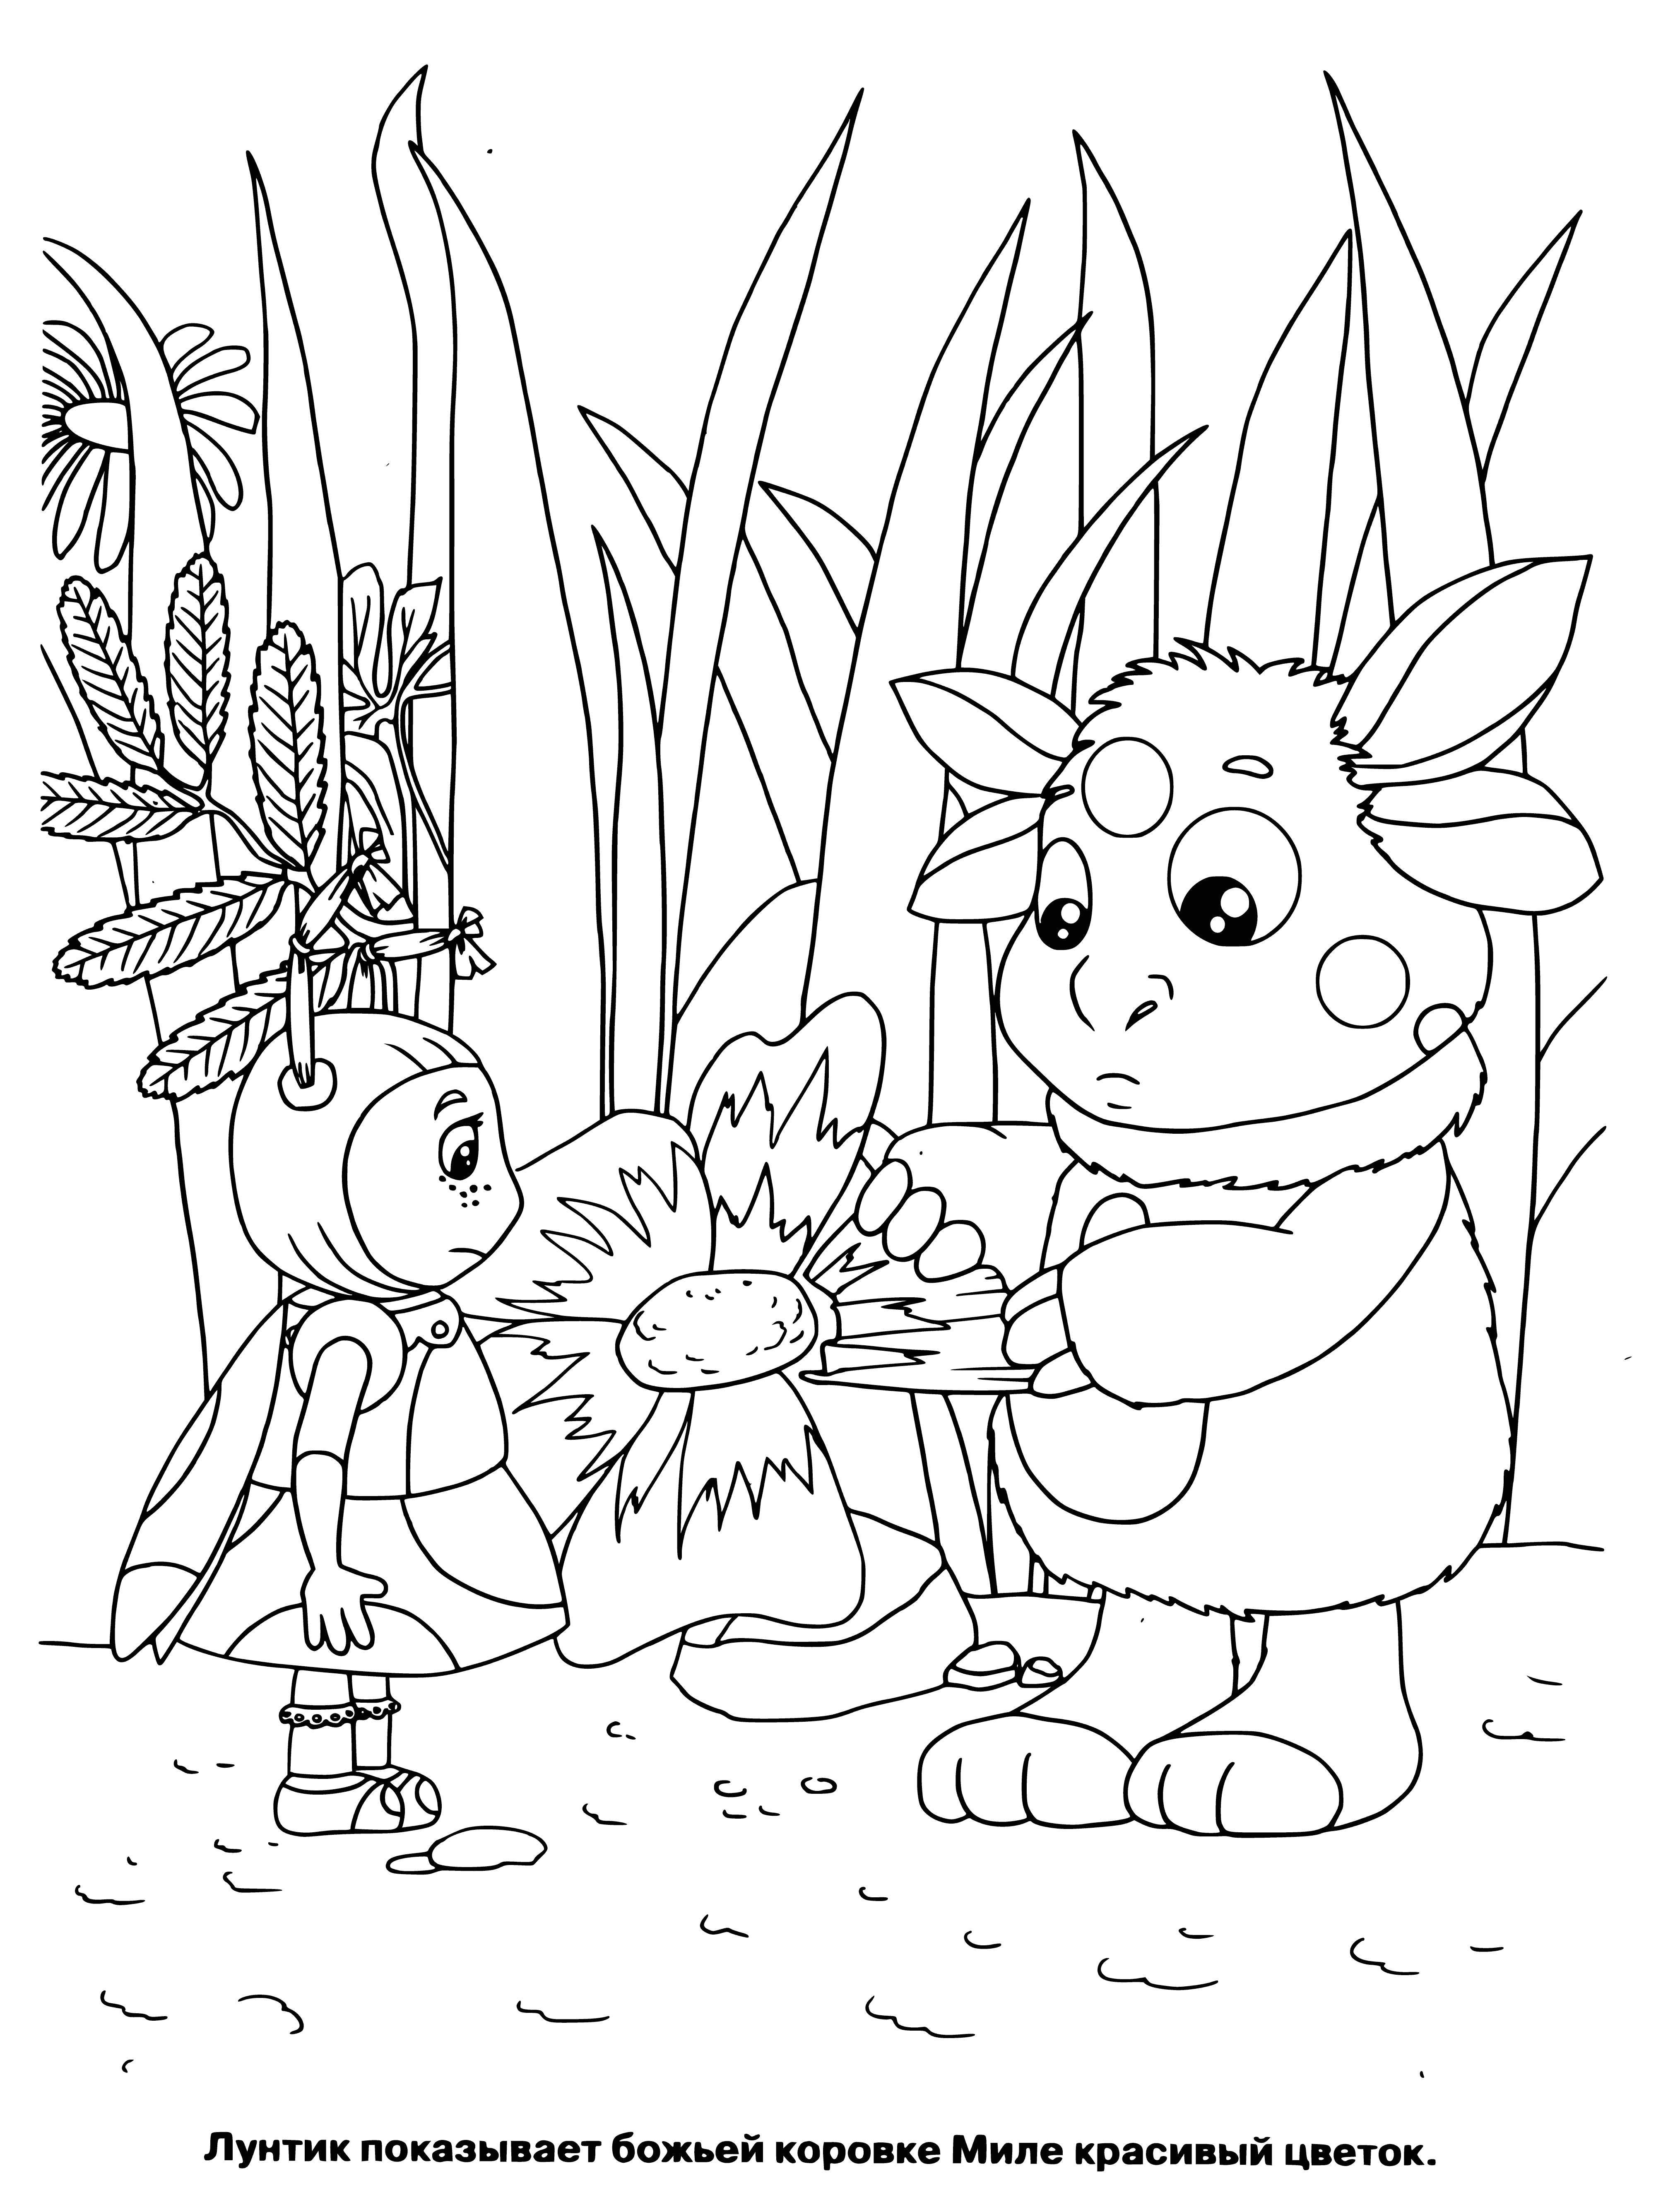 coloring page: A yellow creature stands on two short legs, holding two furry hands in front of three colorful blooms. #TheLittleGardener